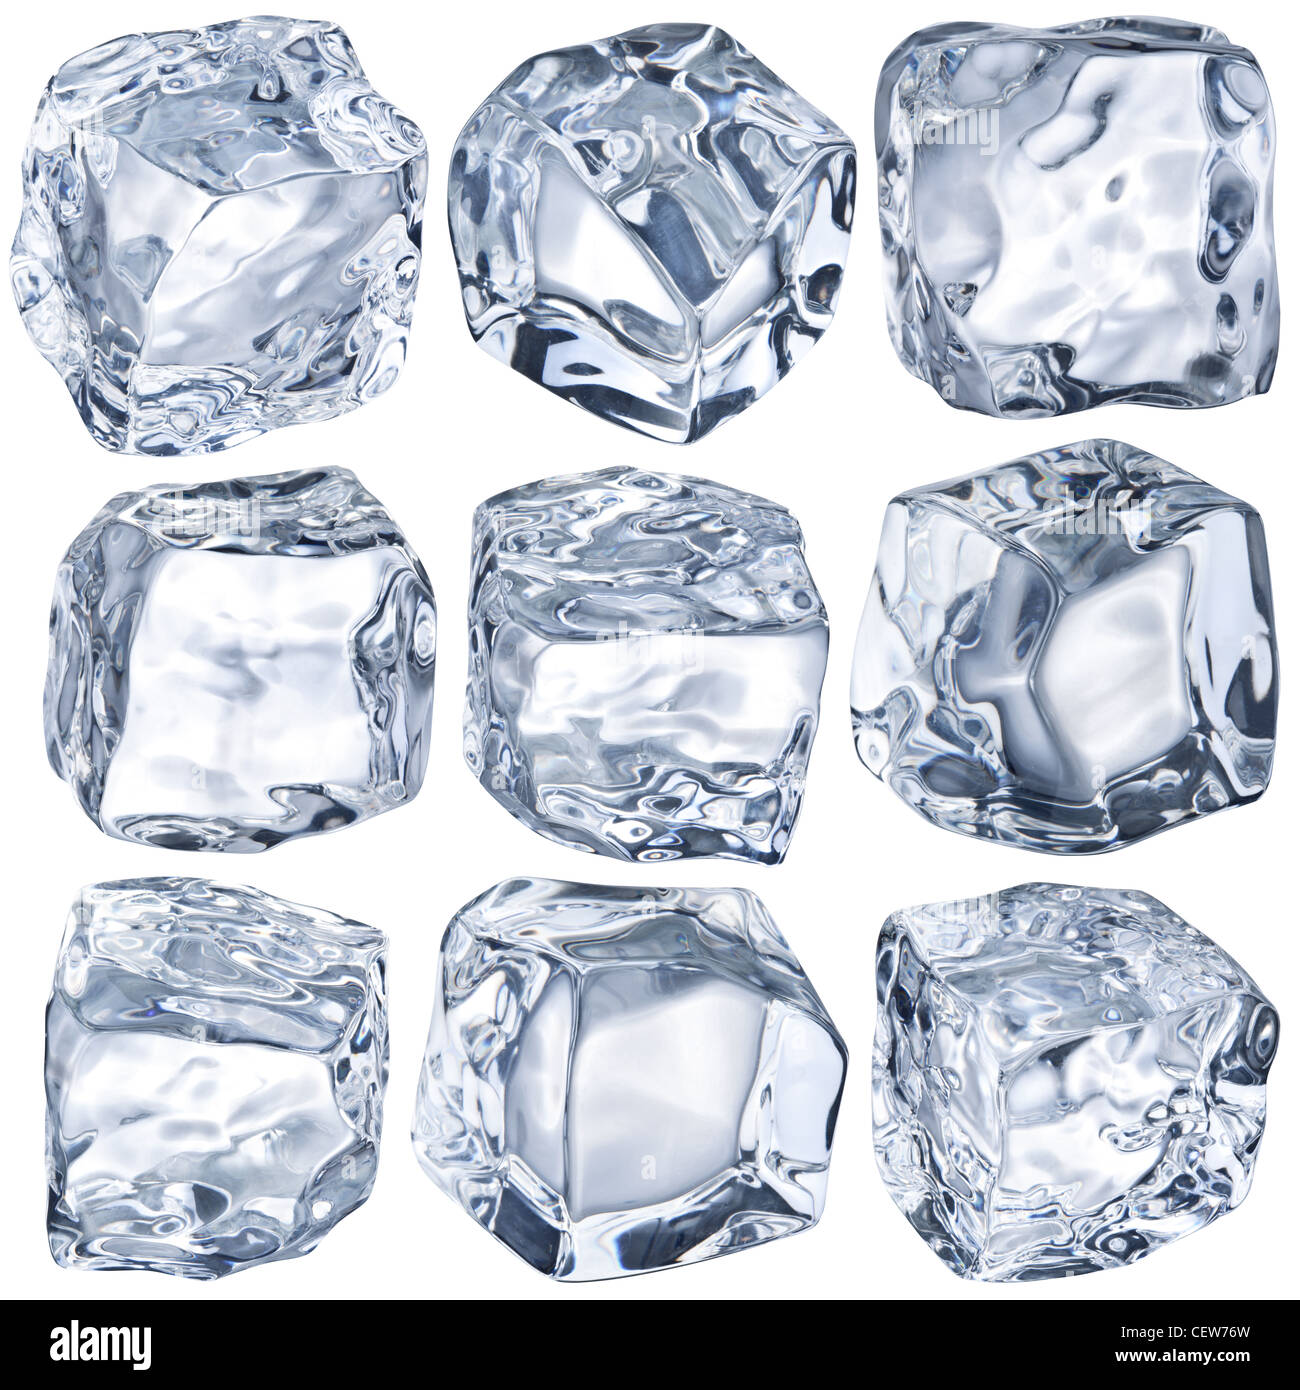 9+ Thousand Christmas Ice Cubes Royalty-Free Images, Stock Photos